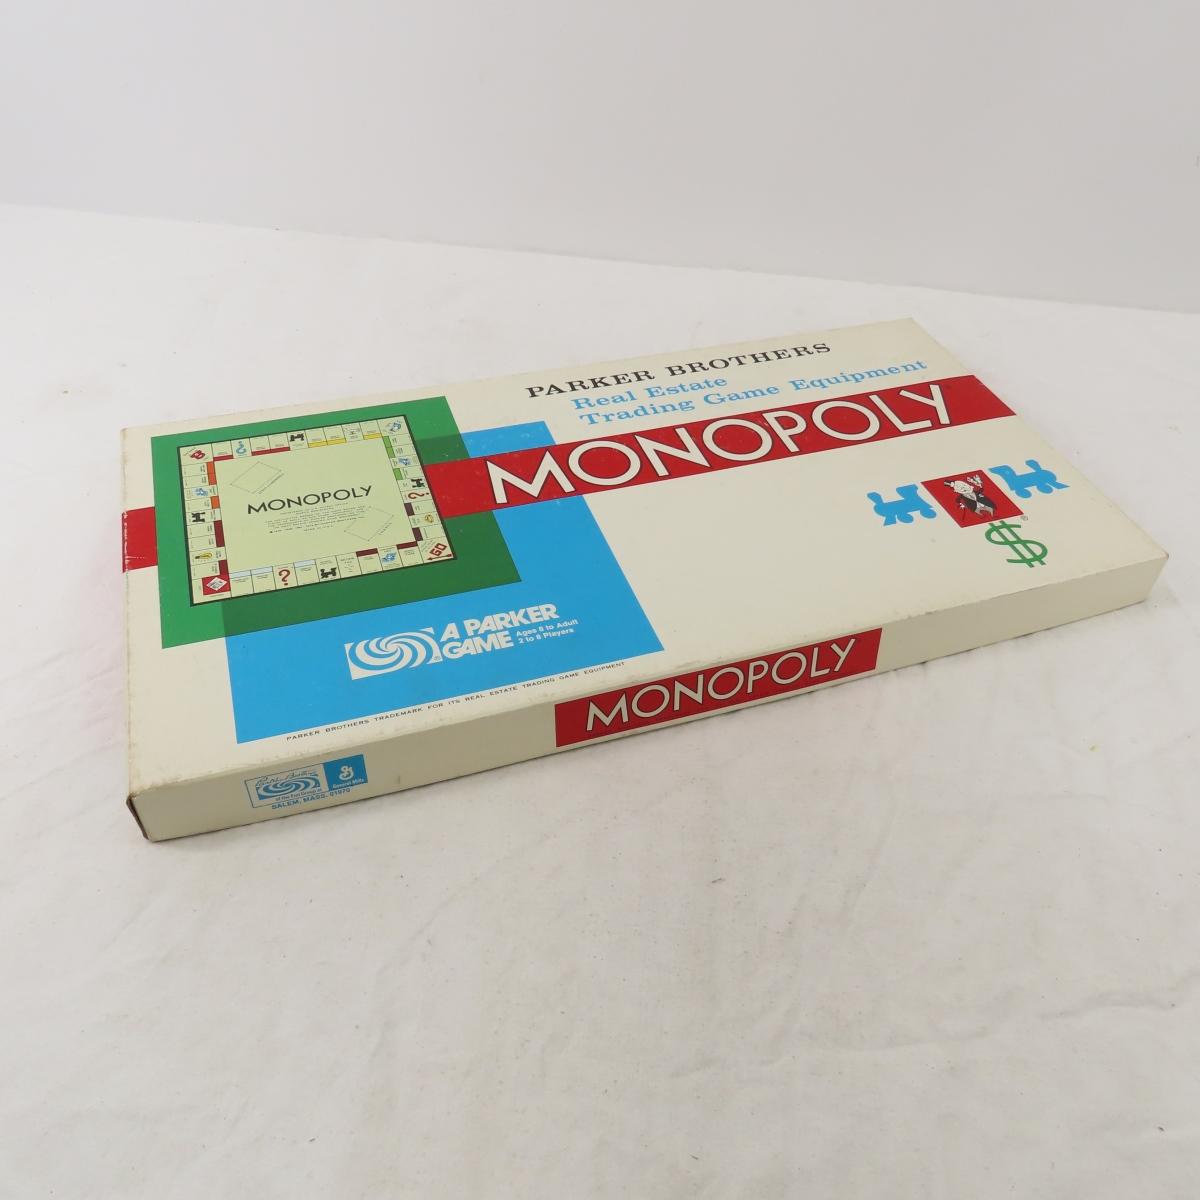 Vintage Monopoly and Fisher Price Record Player